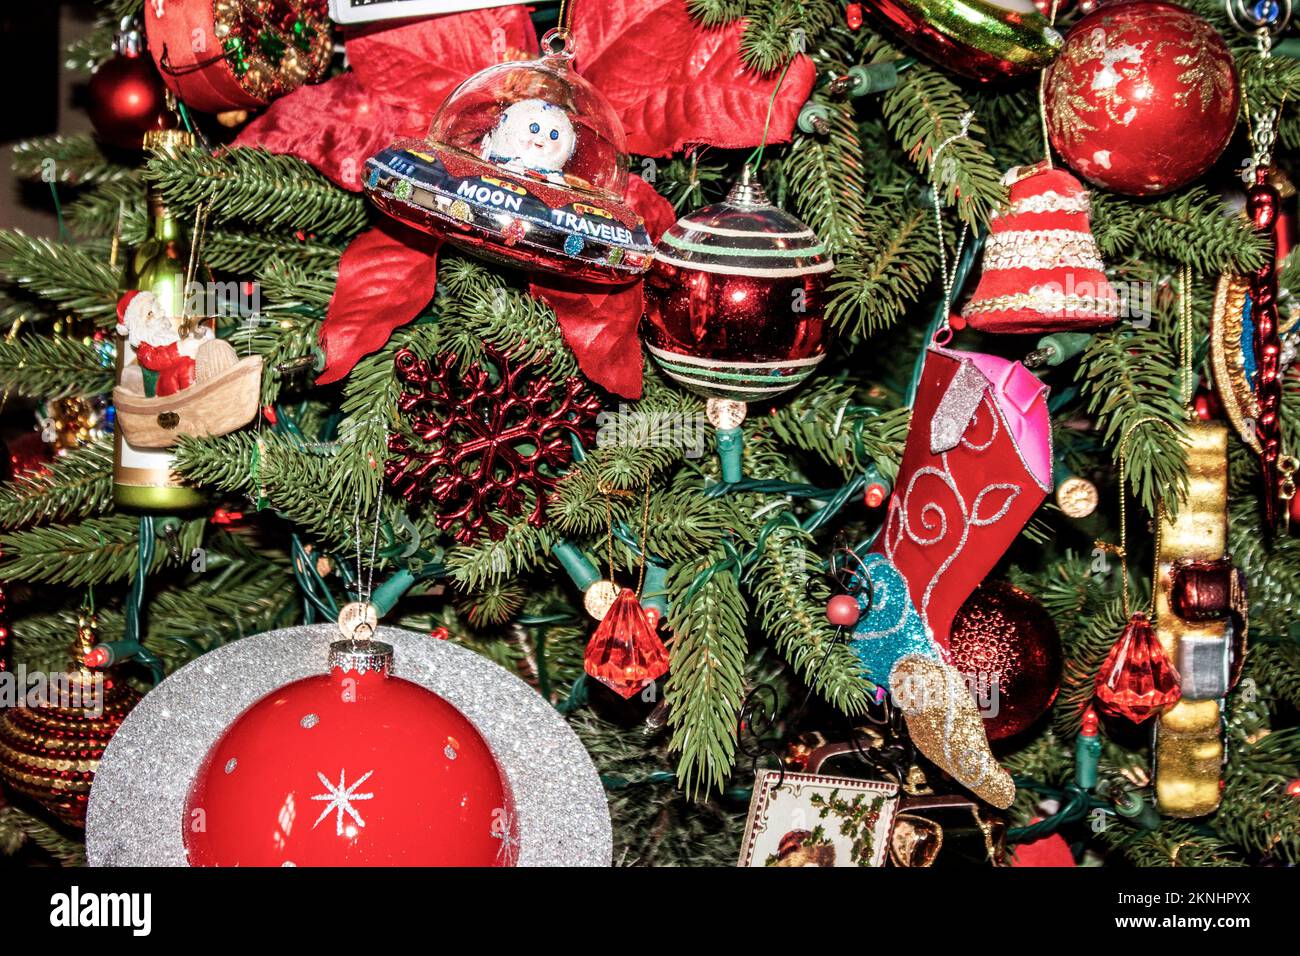 Old fashioned Christmas tree with kitchy outerspace ornaments and cowboy boot and other vintage decorations - Closeup. Stock Photo